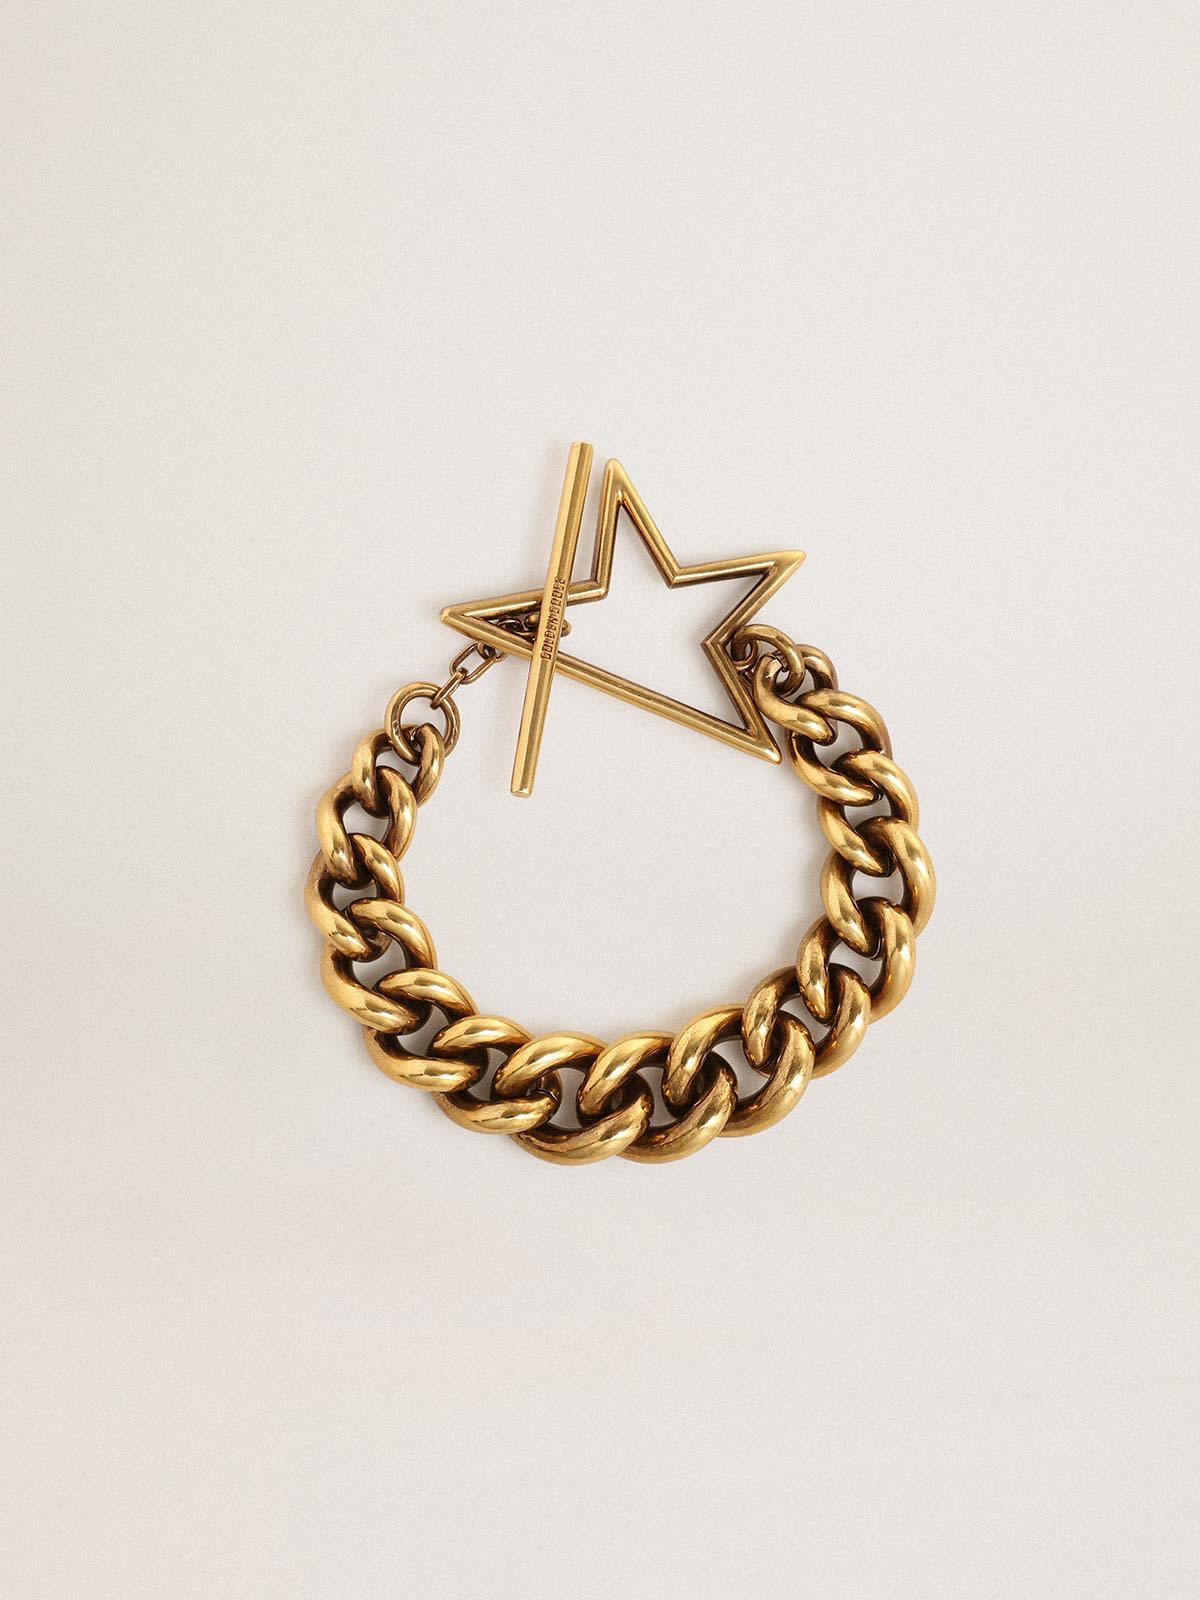 Golden Goose - Bracelet in antique gold decreasing chain with star-shaped clasp in 